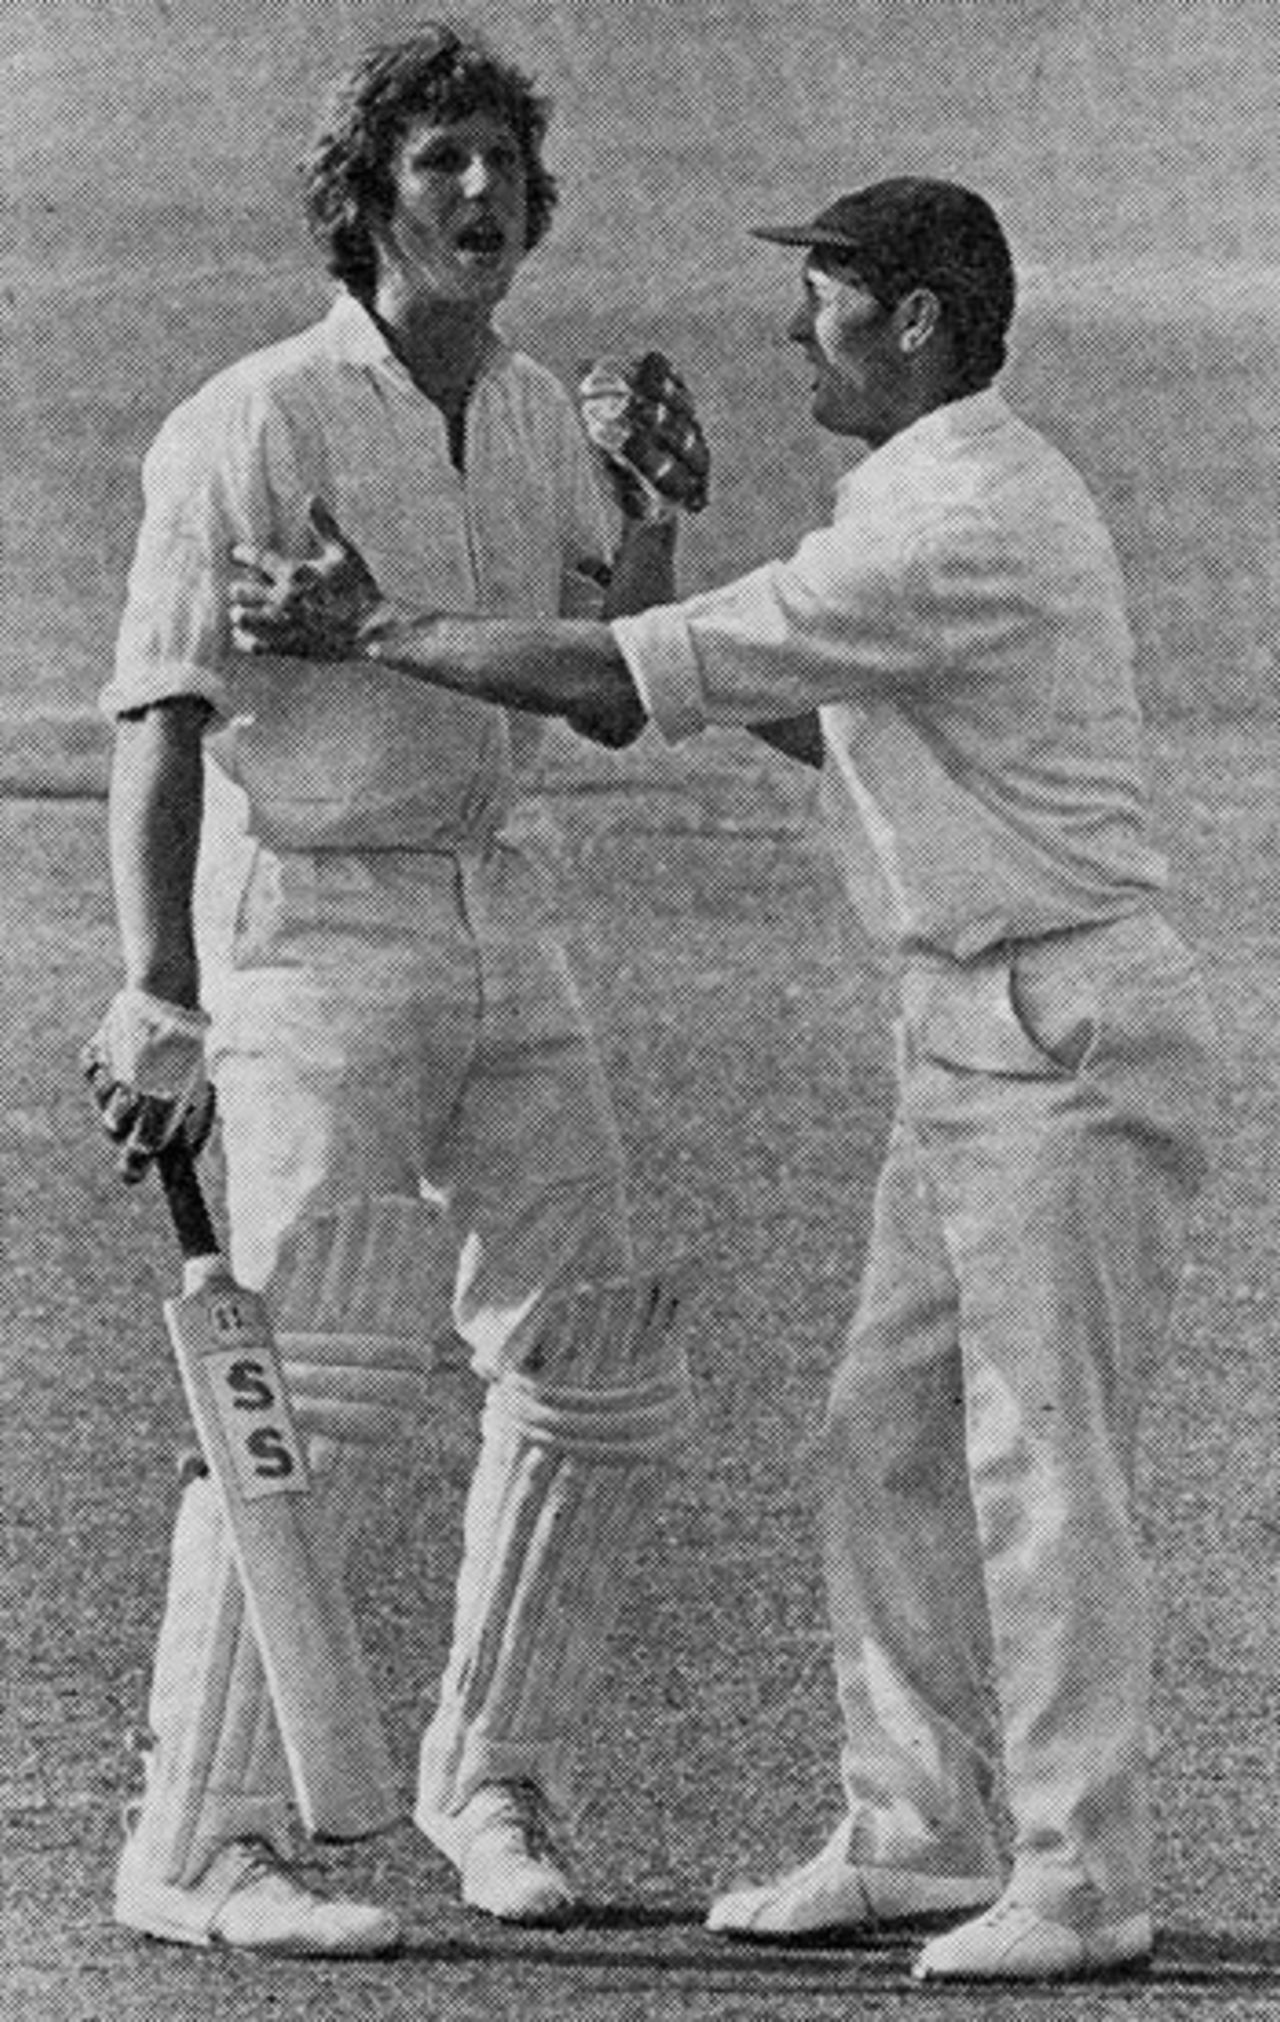 Ian Botham is helped by Peter Sainsbury after being hit by Andy Roberts, Hampshire v Somerset, Southampton, June 12, 1974